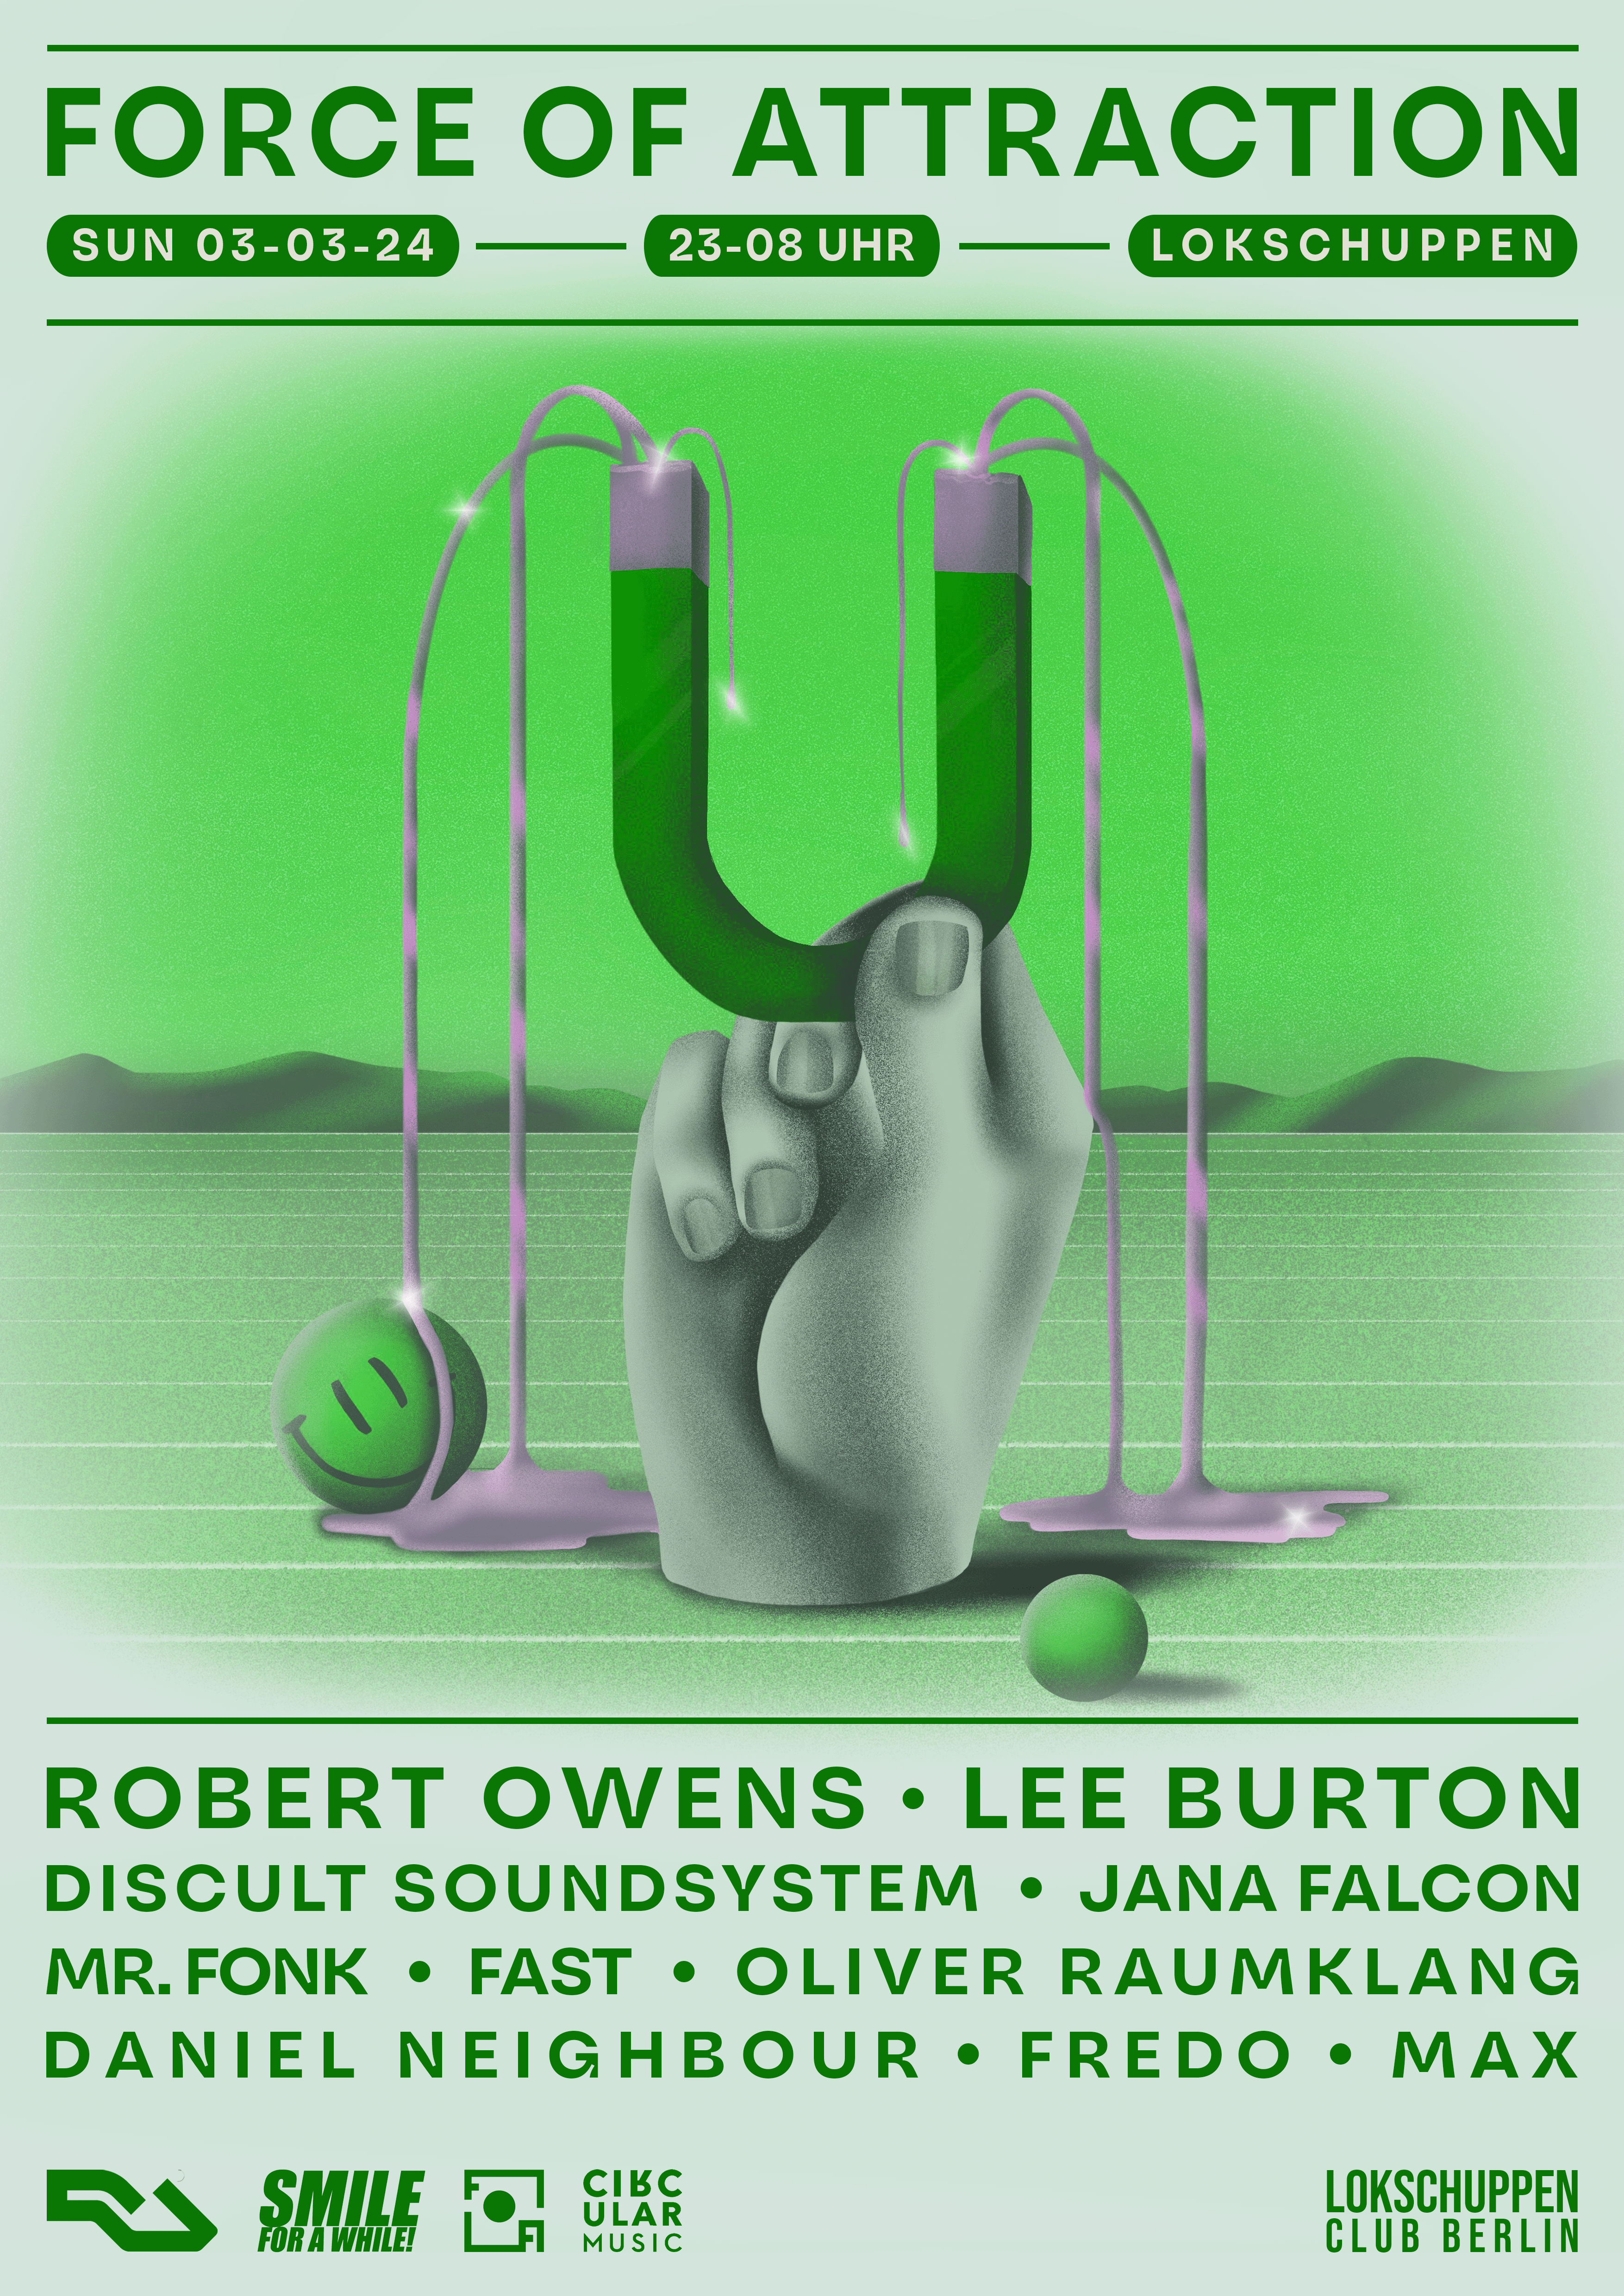 FORCE OF ATTRACTION with Robert Owens, Lee Burton, Discult Soundsystem, Jana Falcon - Página frontal